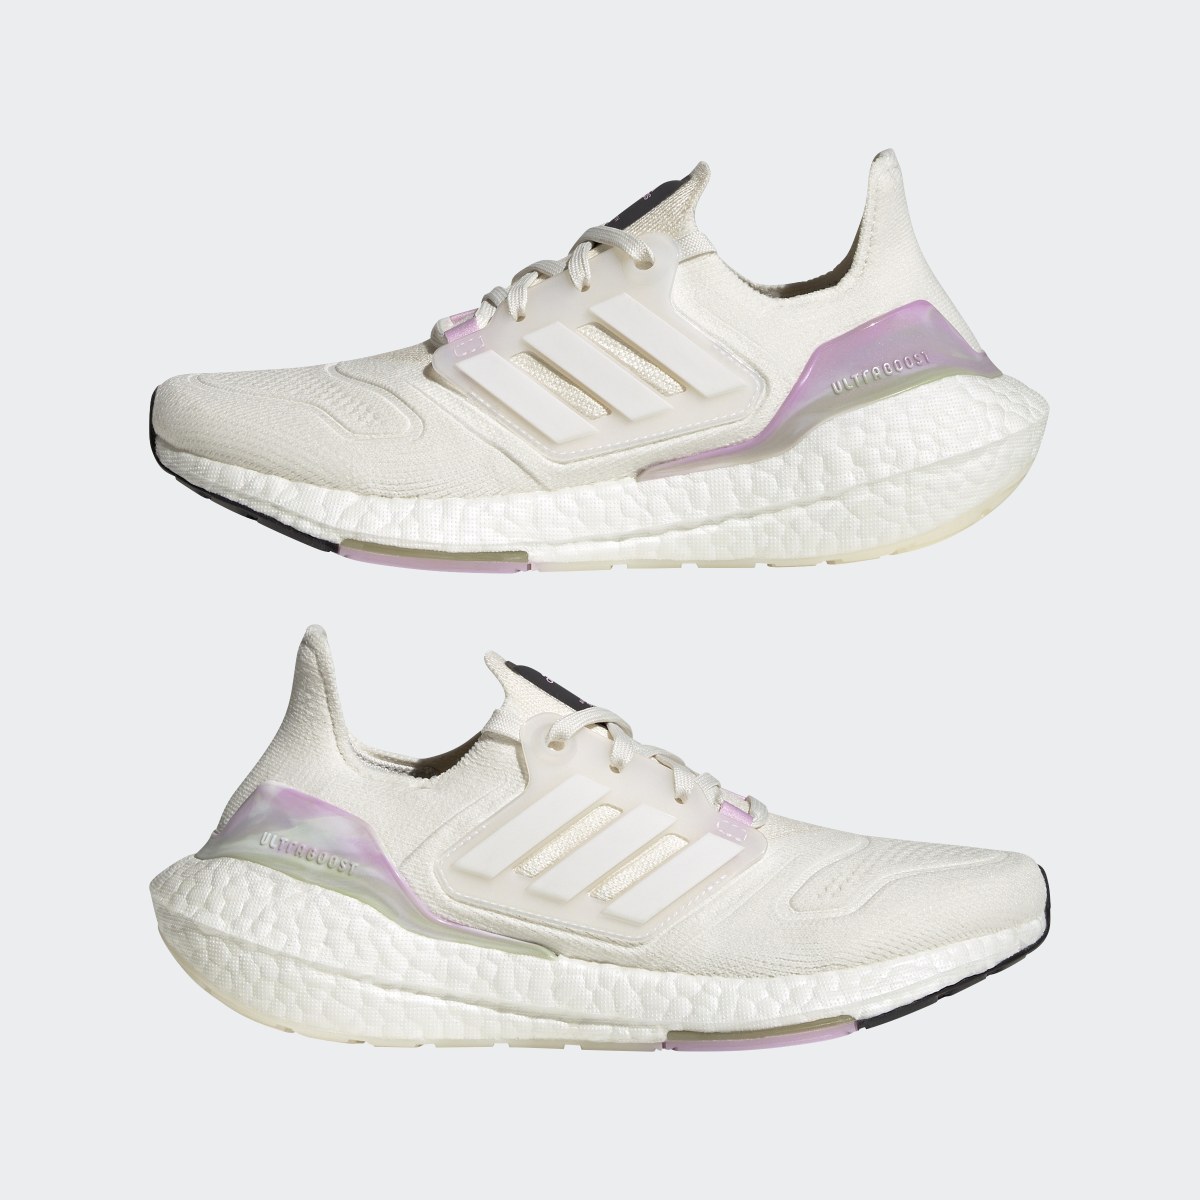 Adidas Chaussure Ultraboost 22 Made With Nature. 11